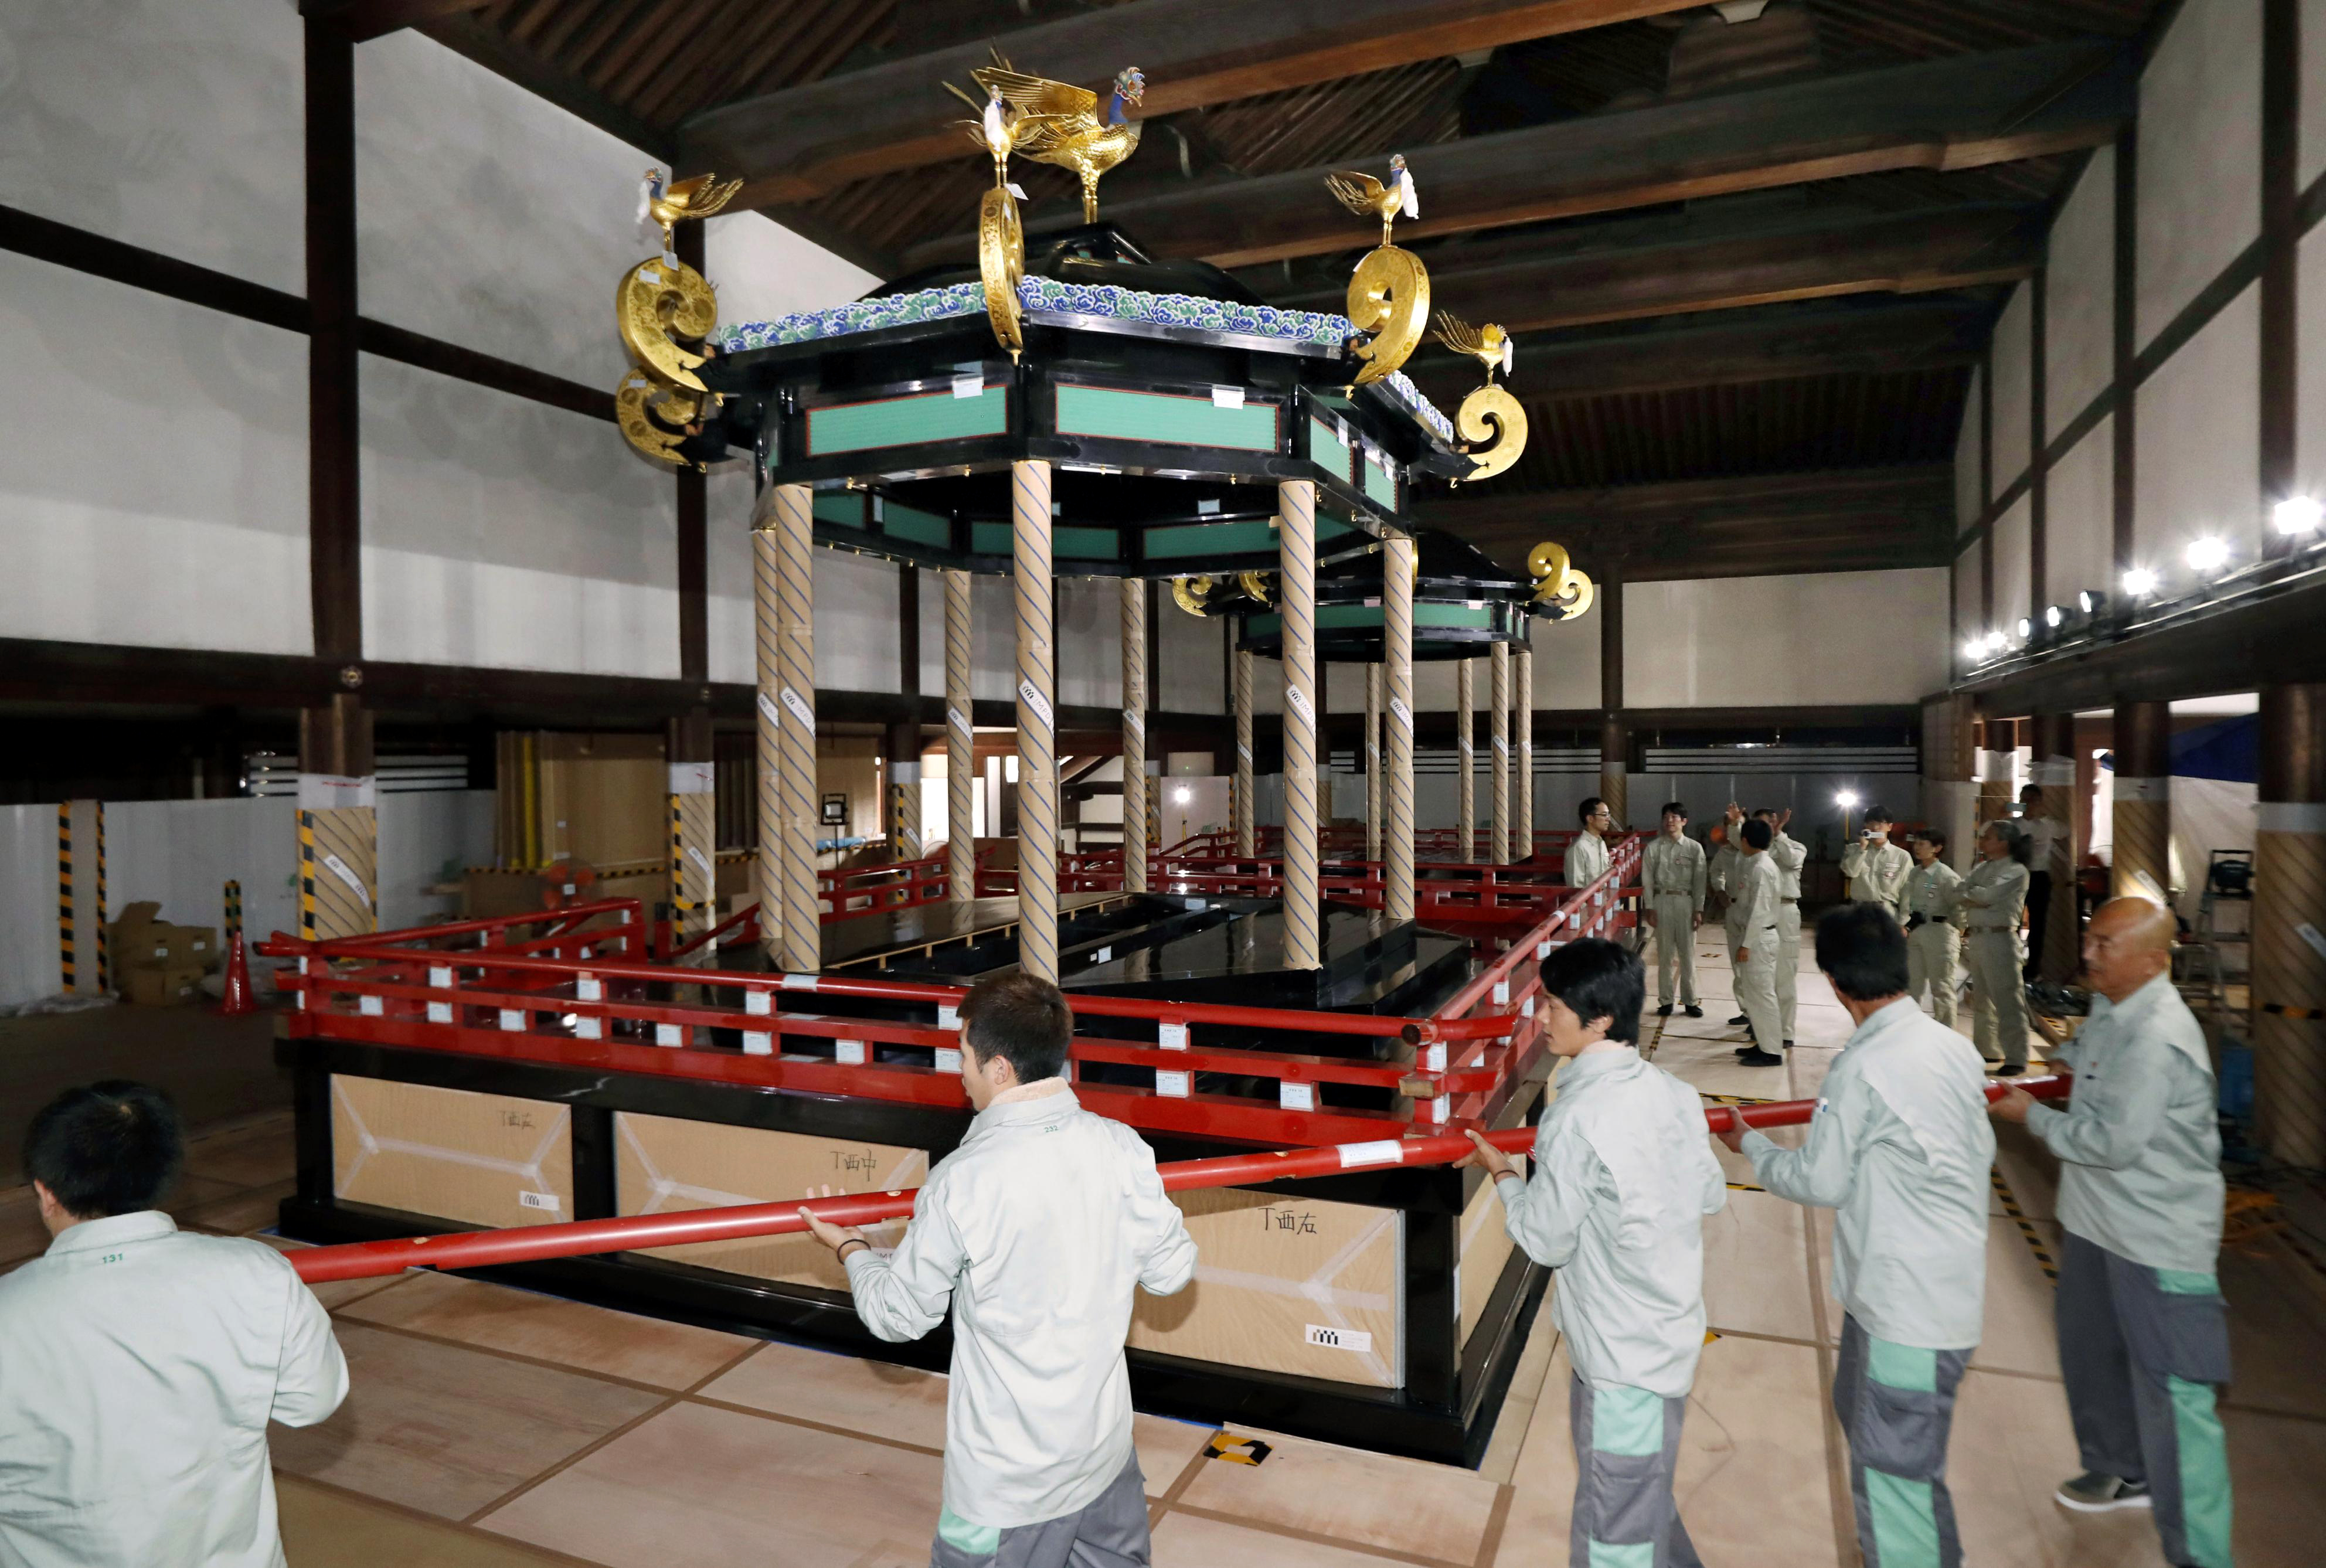 The Takamikura throne is disassembled at the Kyoto Imperial Palace 